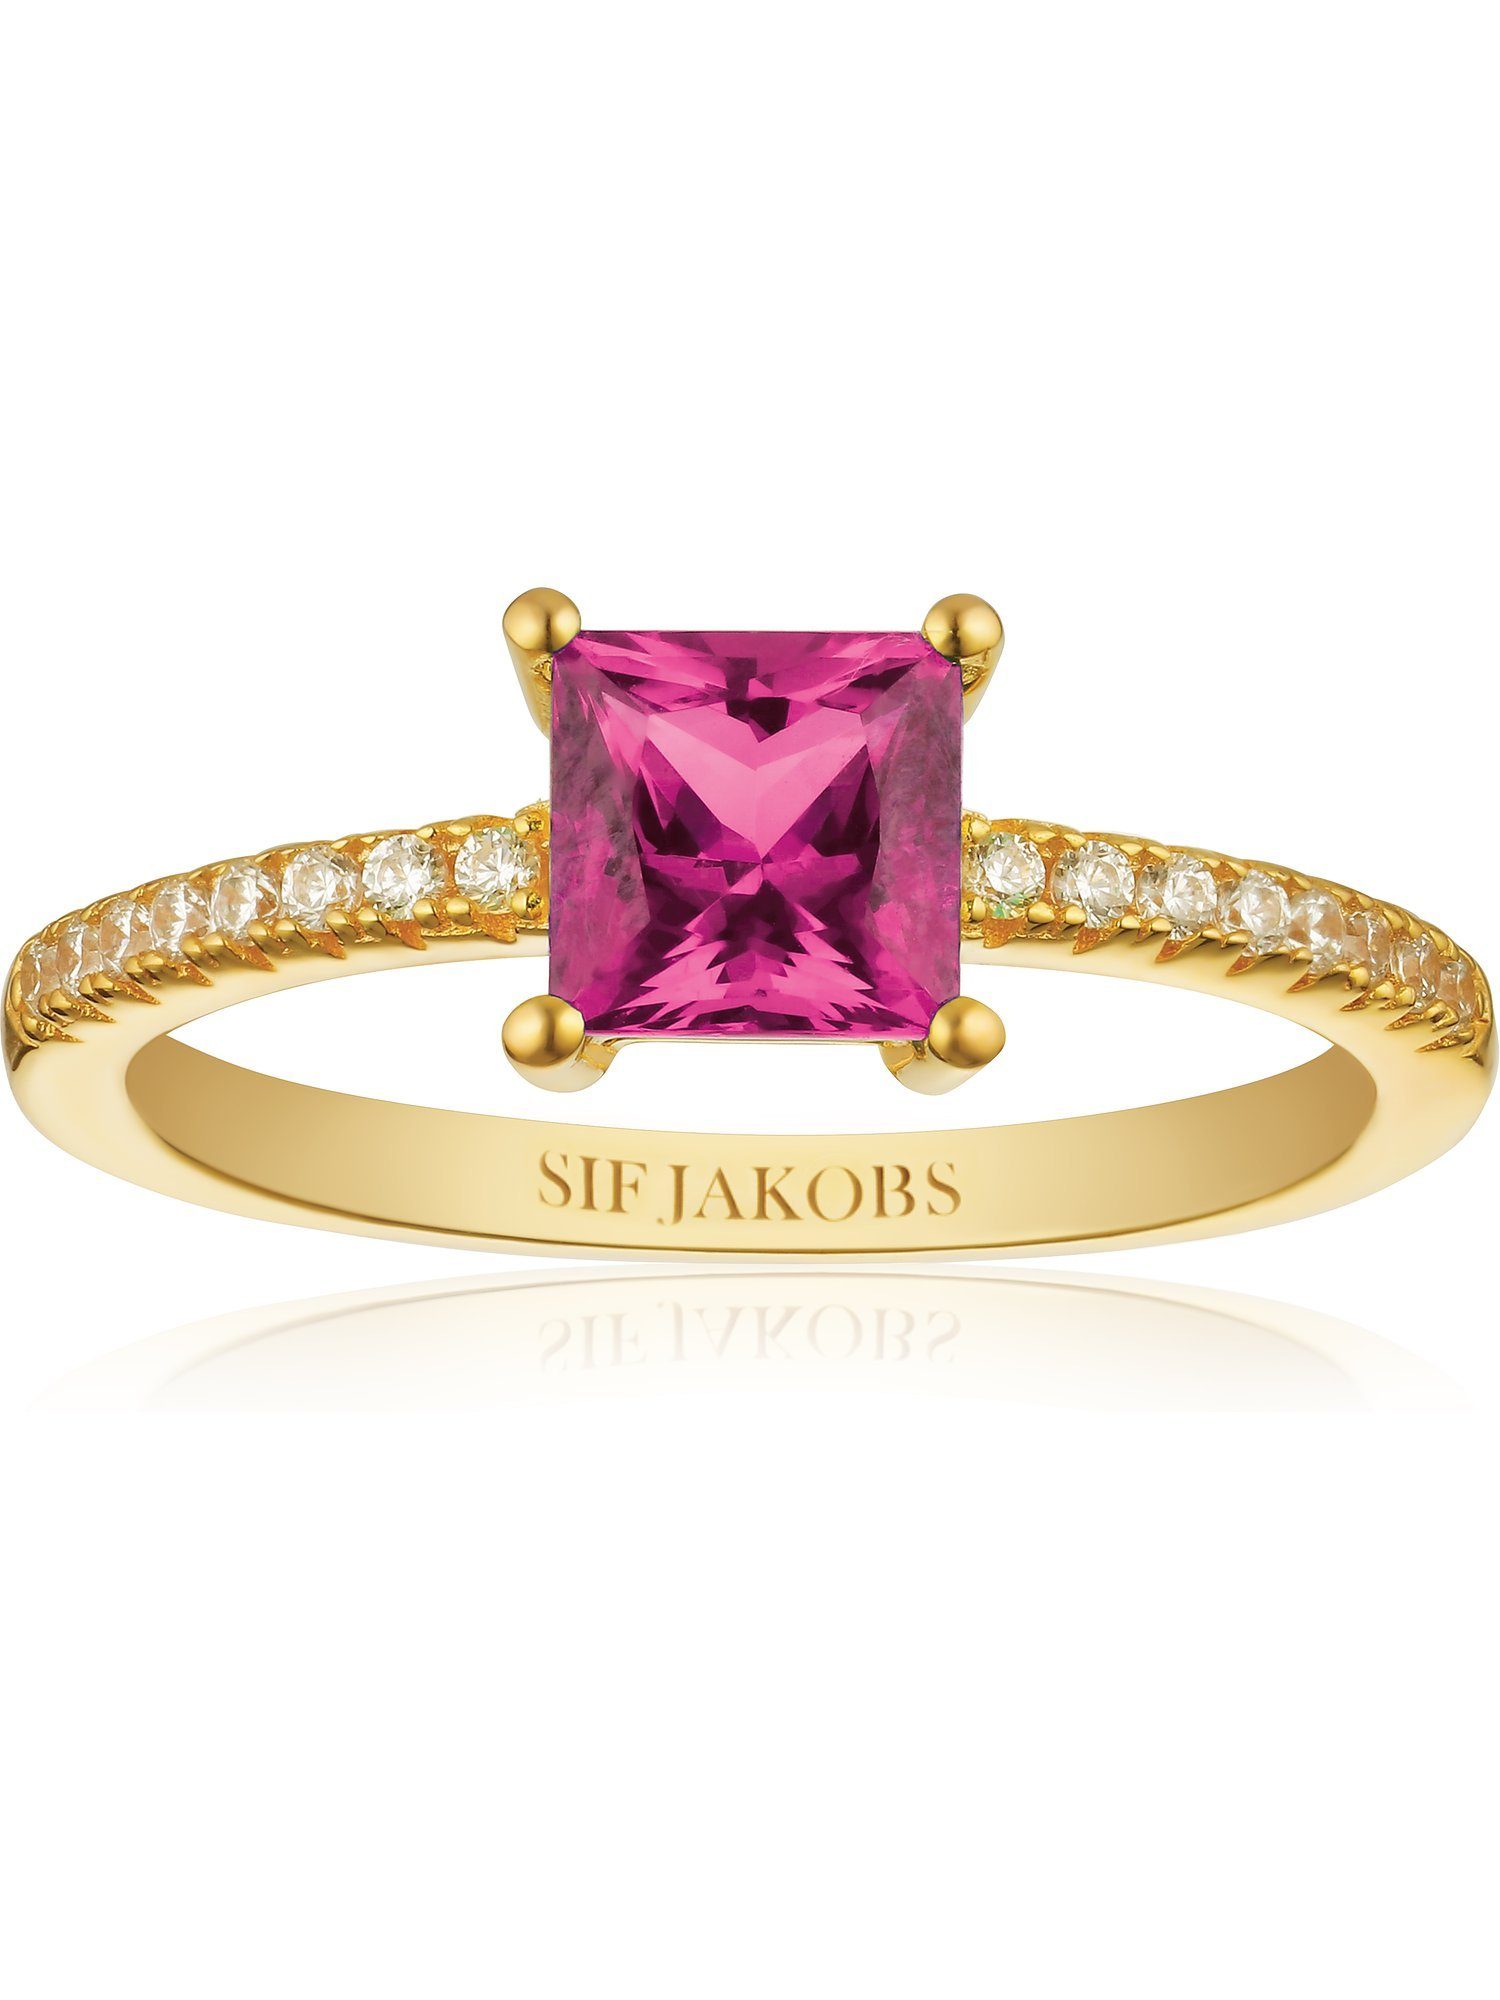 Silberring Jakobs gold, Sif rosa Jewellery